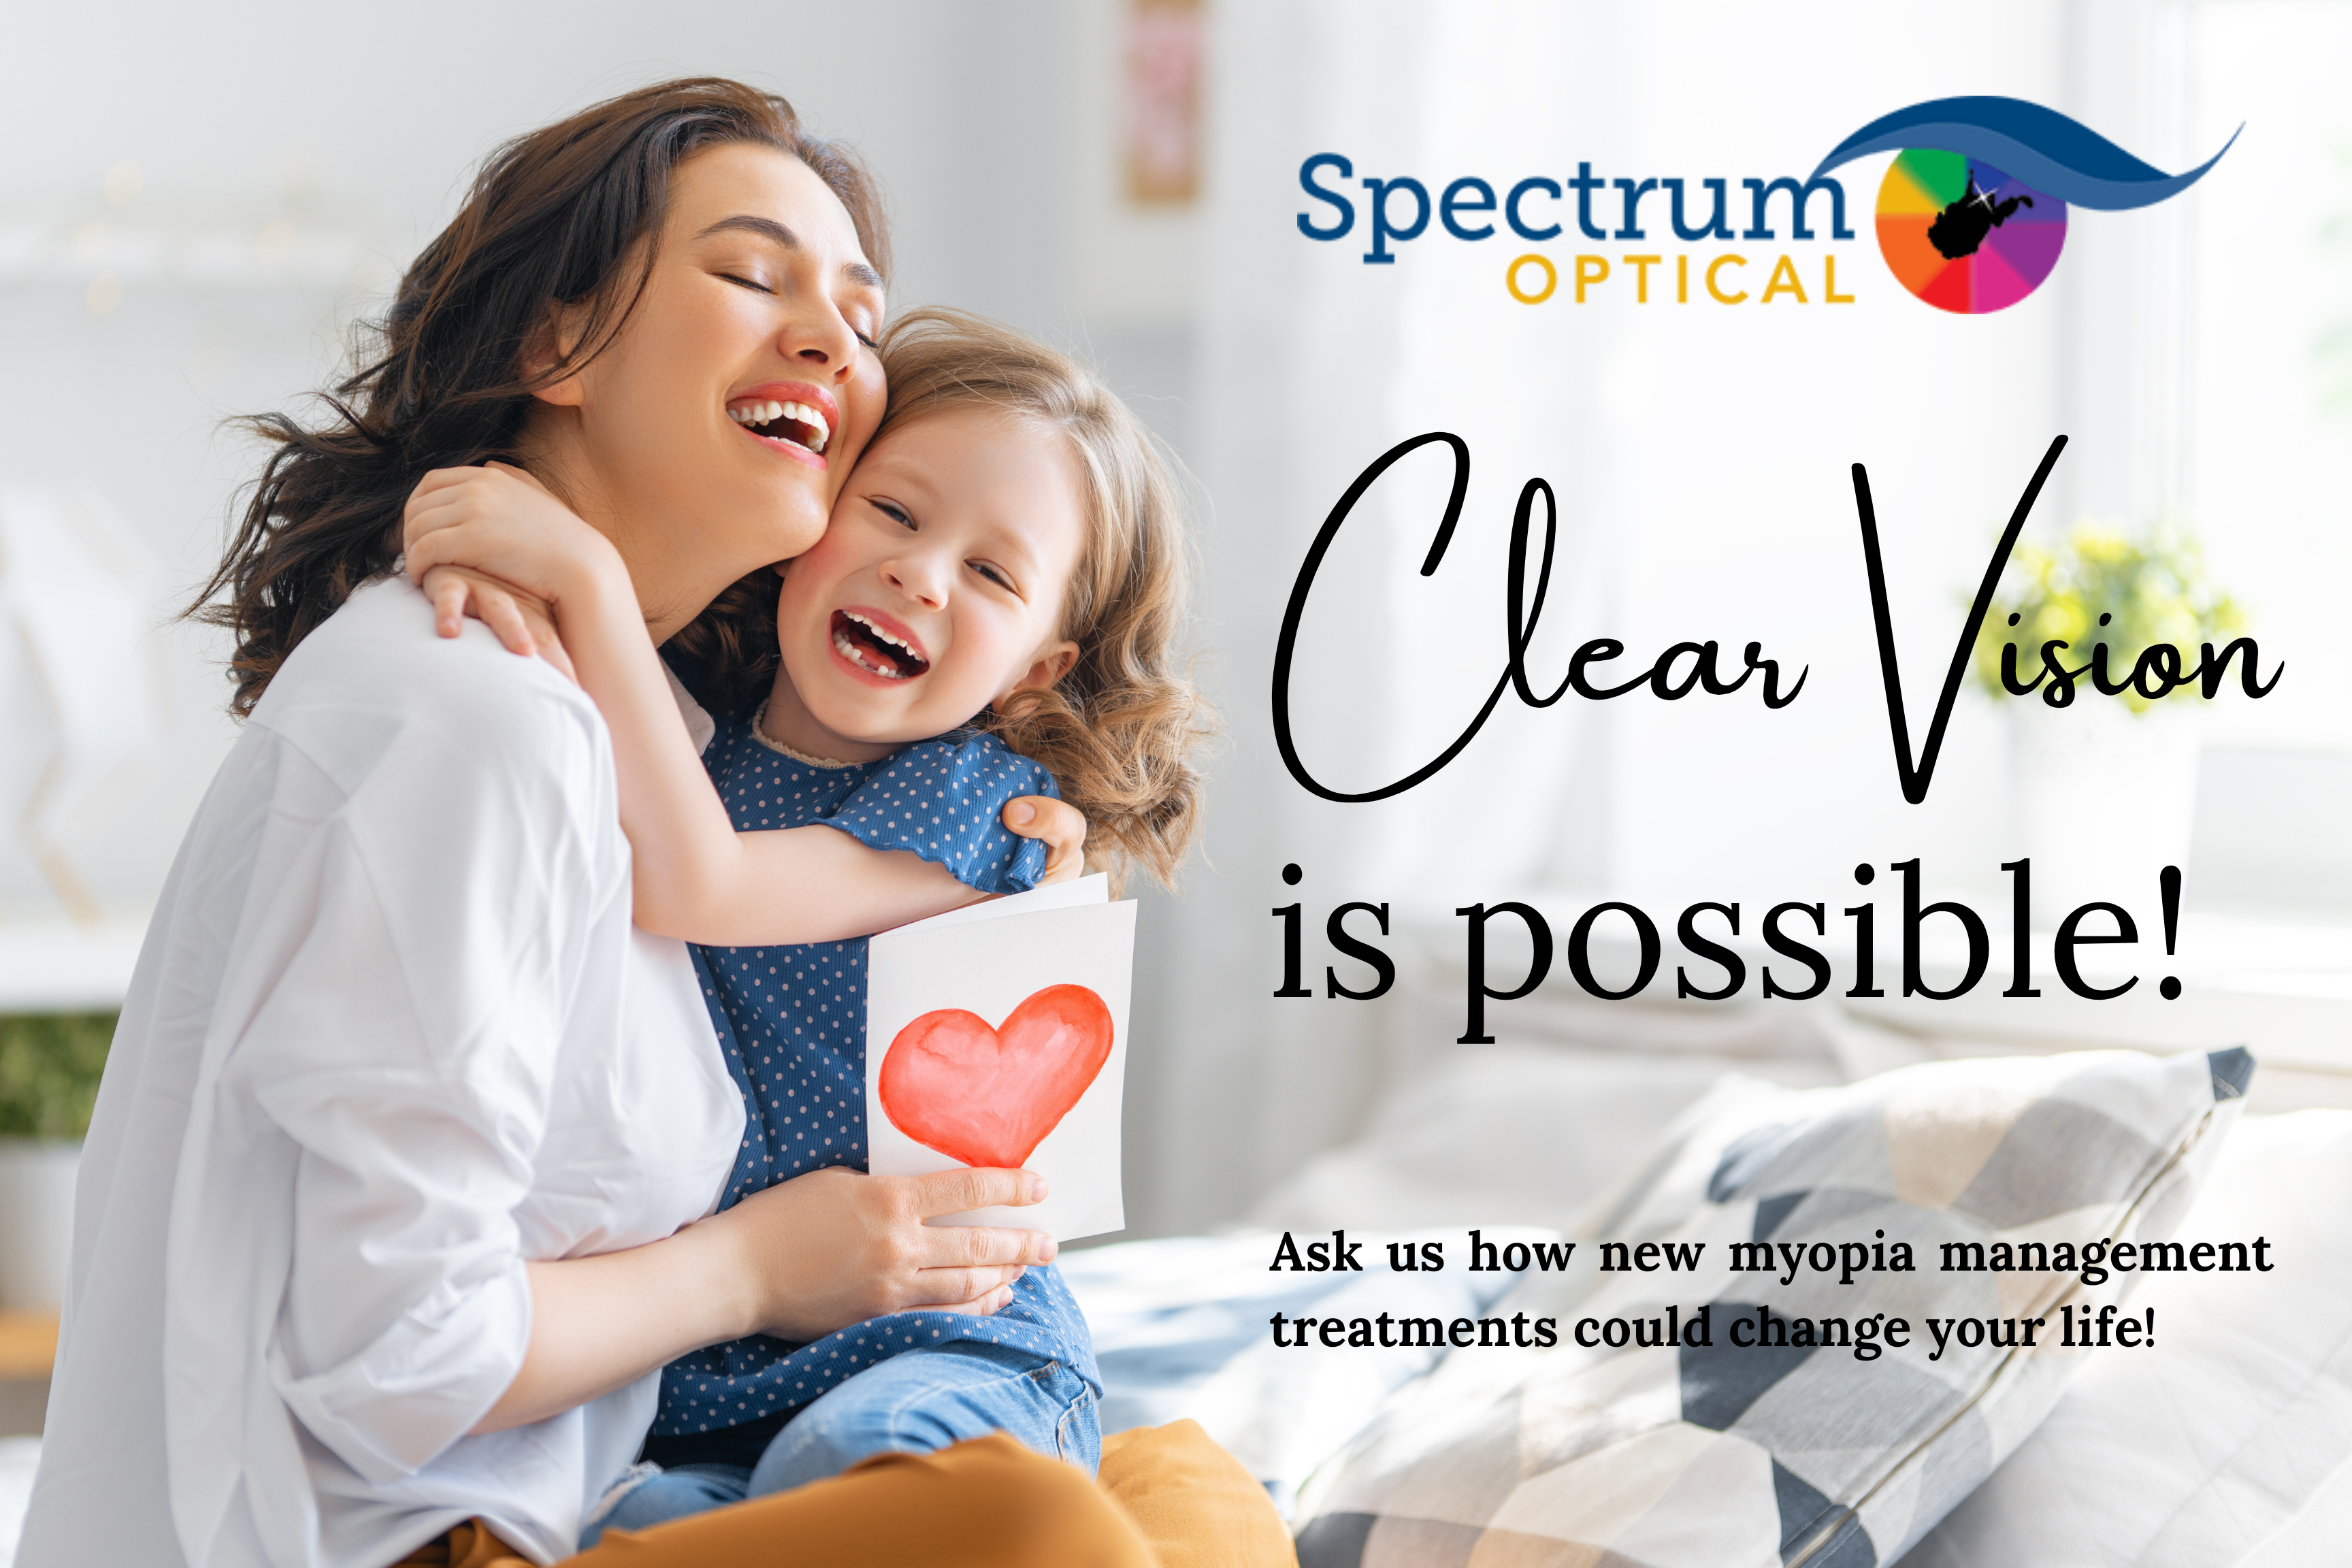 A mother and daughter smile and embrace beside the Spectrum Optical logo